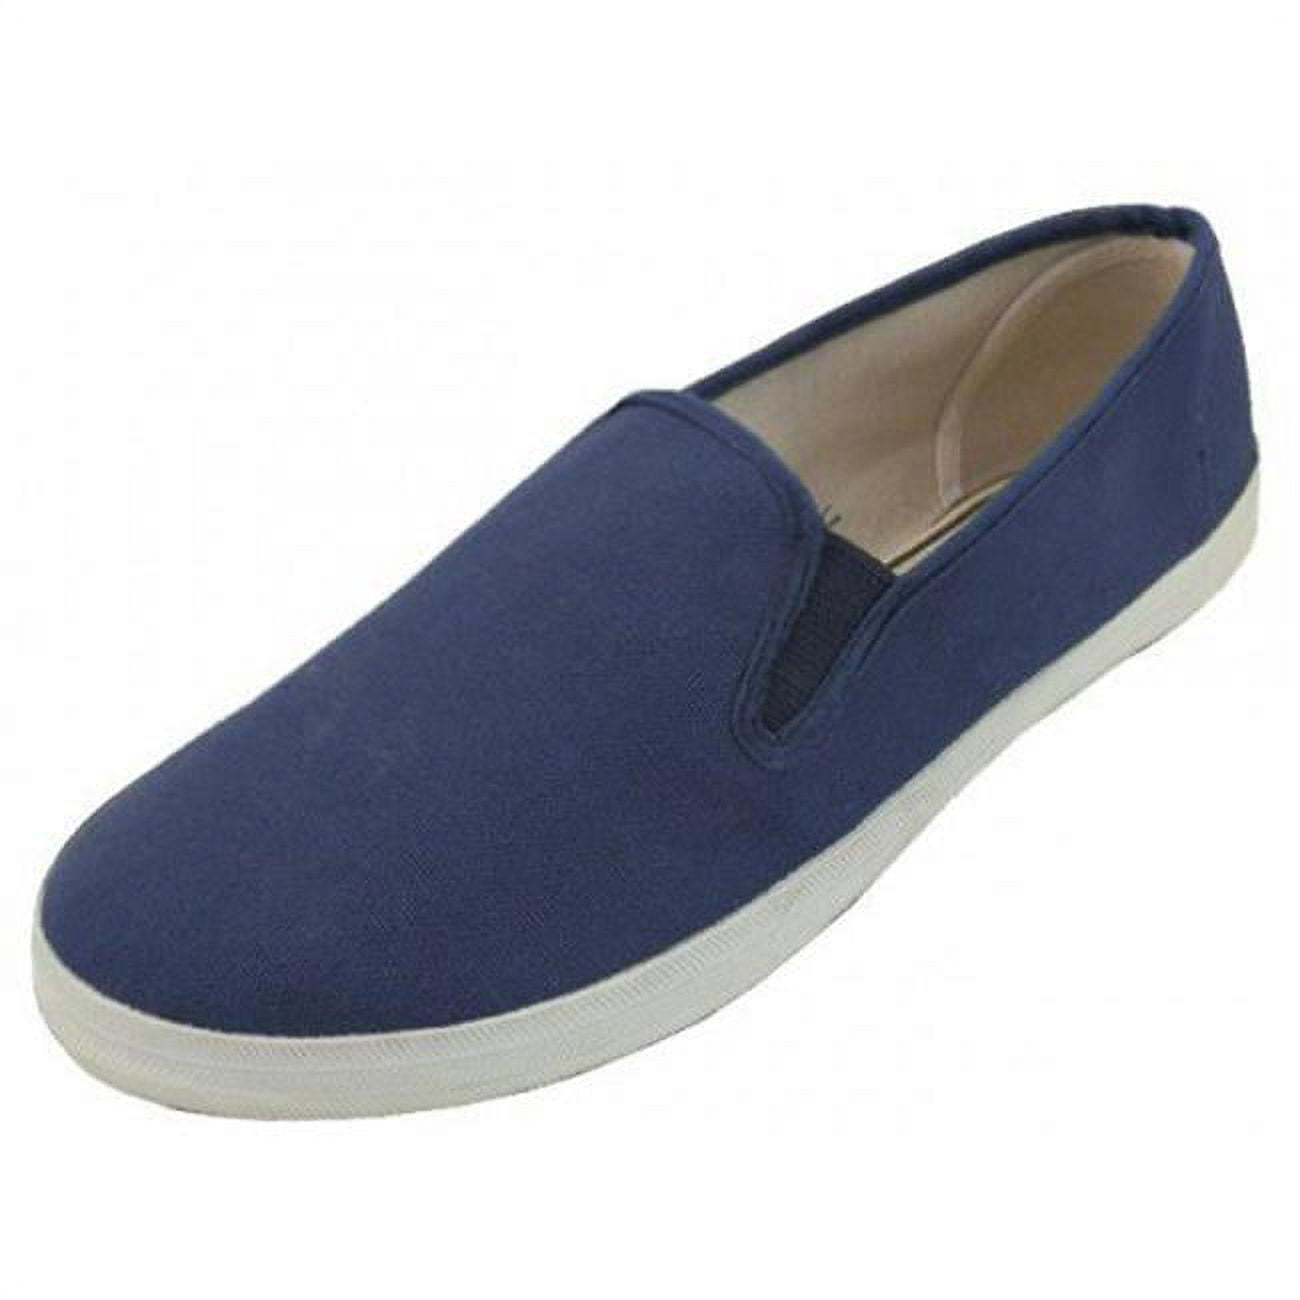 Mens Slip On Canvas Shoes, 24 Pairs, Navy - Case Of 24